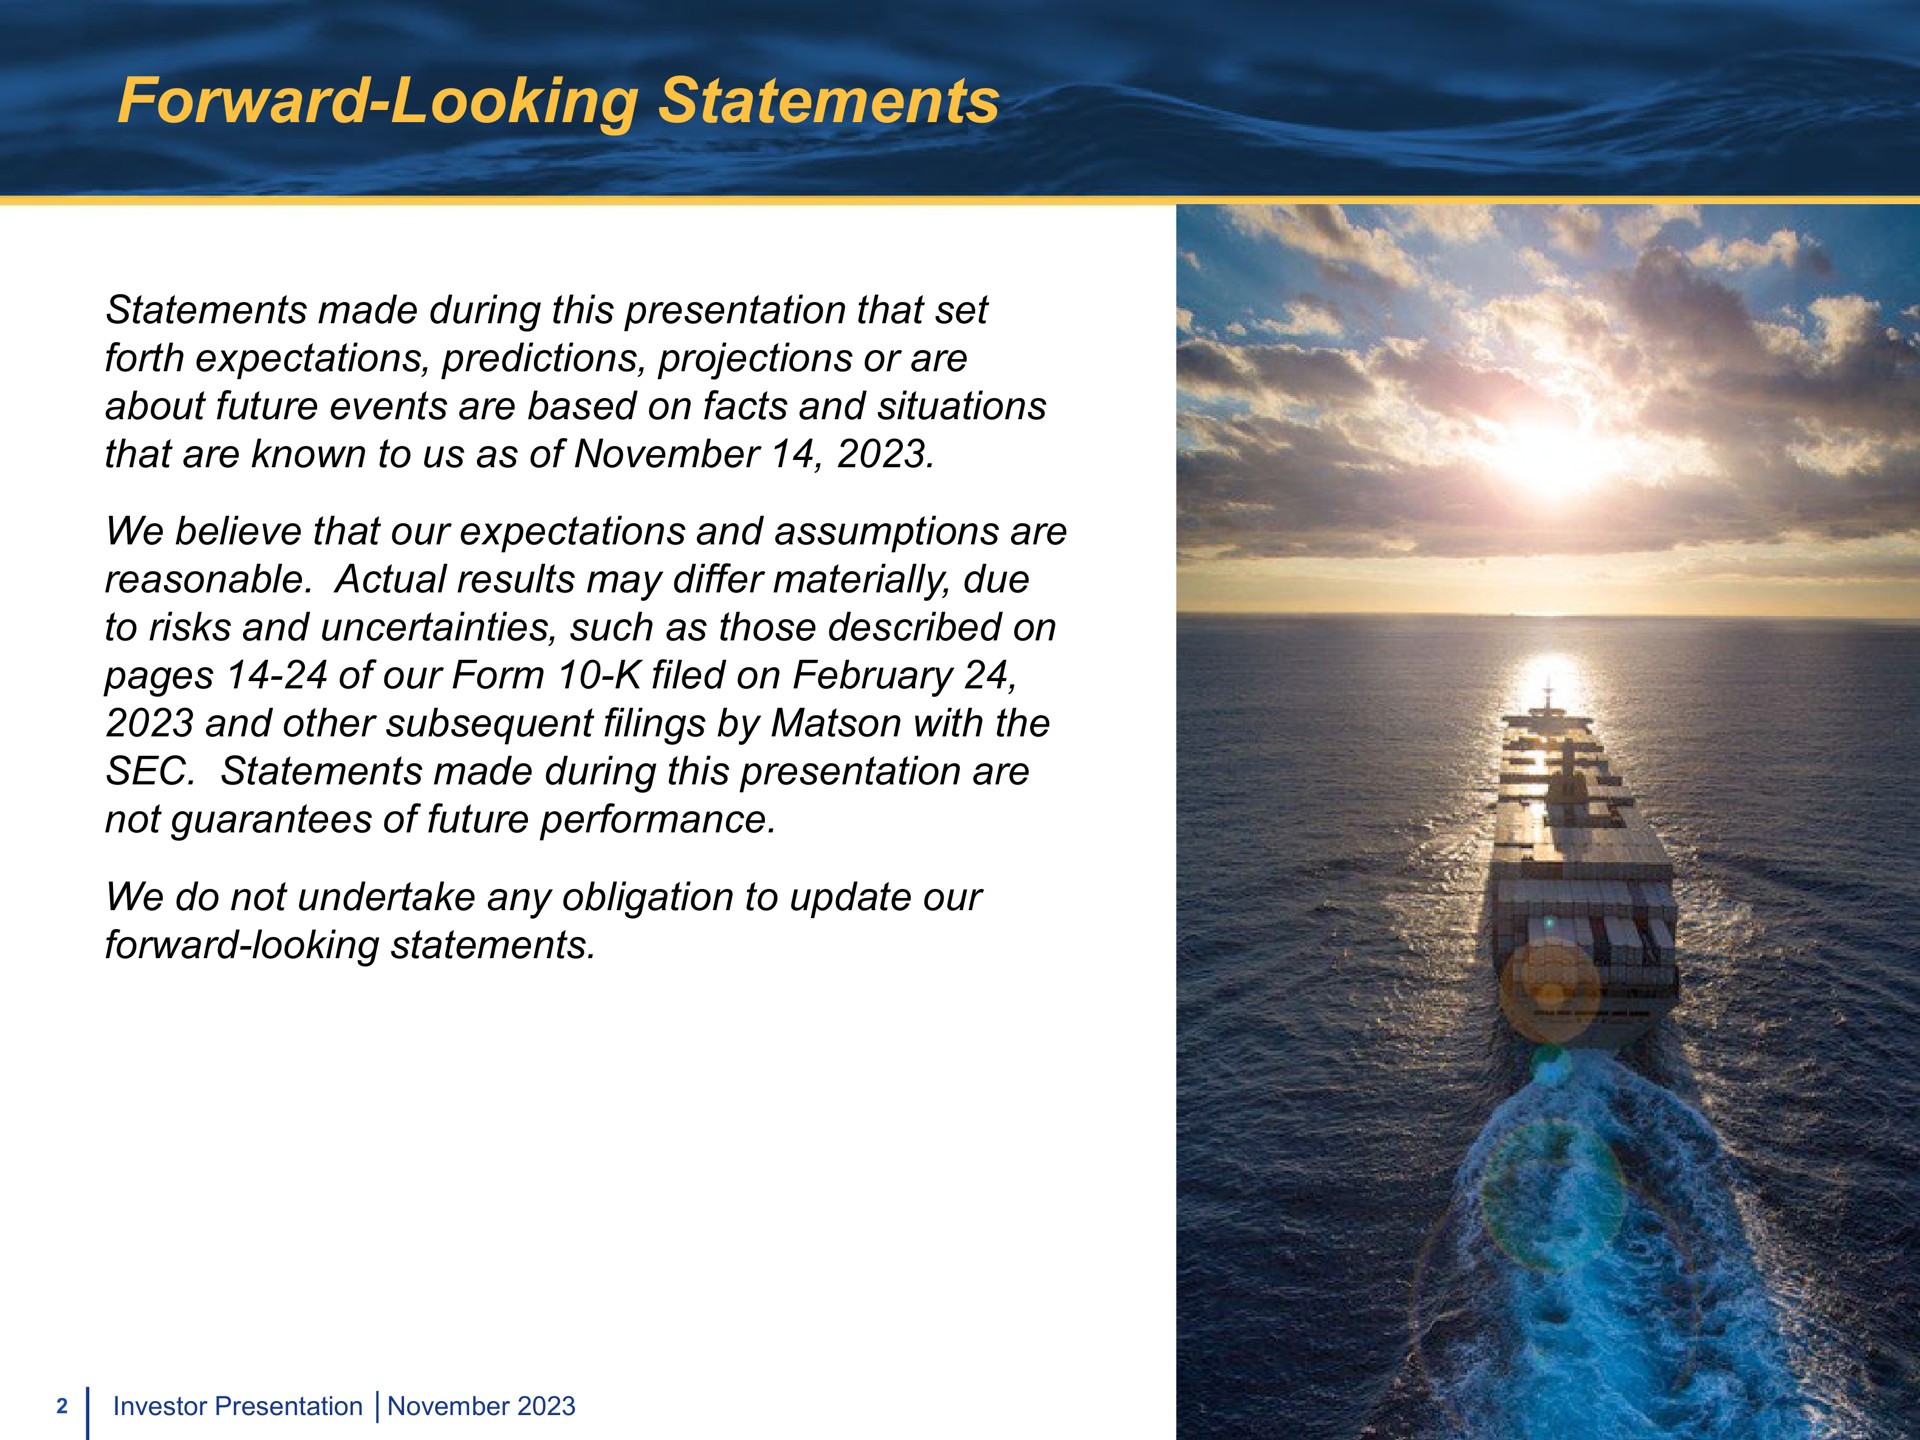 forward looking statements statements made during this presentation that set forth expectations predictions projections or are about future events are based on facts and situations that are known to us as of we believe that our expectations and assumptions are reasonable actual results may differ materially due to risks and uncertainties such as those described on pages of our form filed on and other subsequent filings by with the sec statements made during this presentation are not guarantees of future performance we do not undertake any obligation to update our forward looking statements | Matson